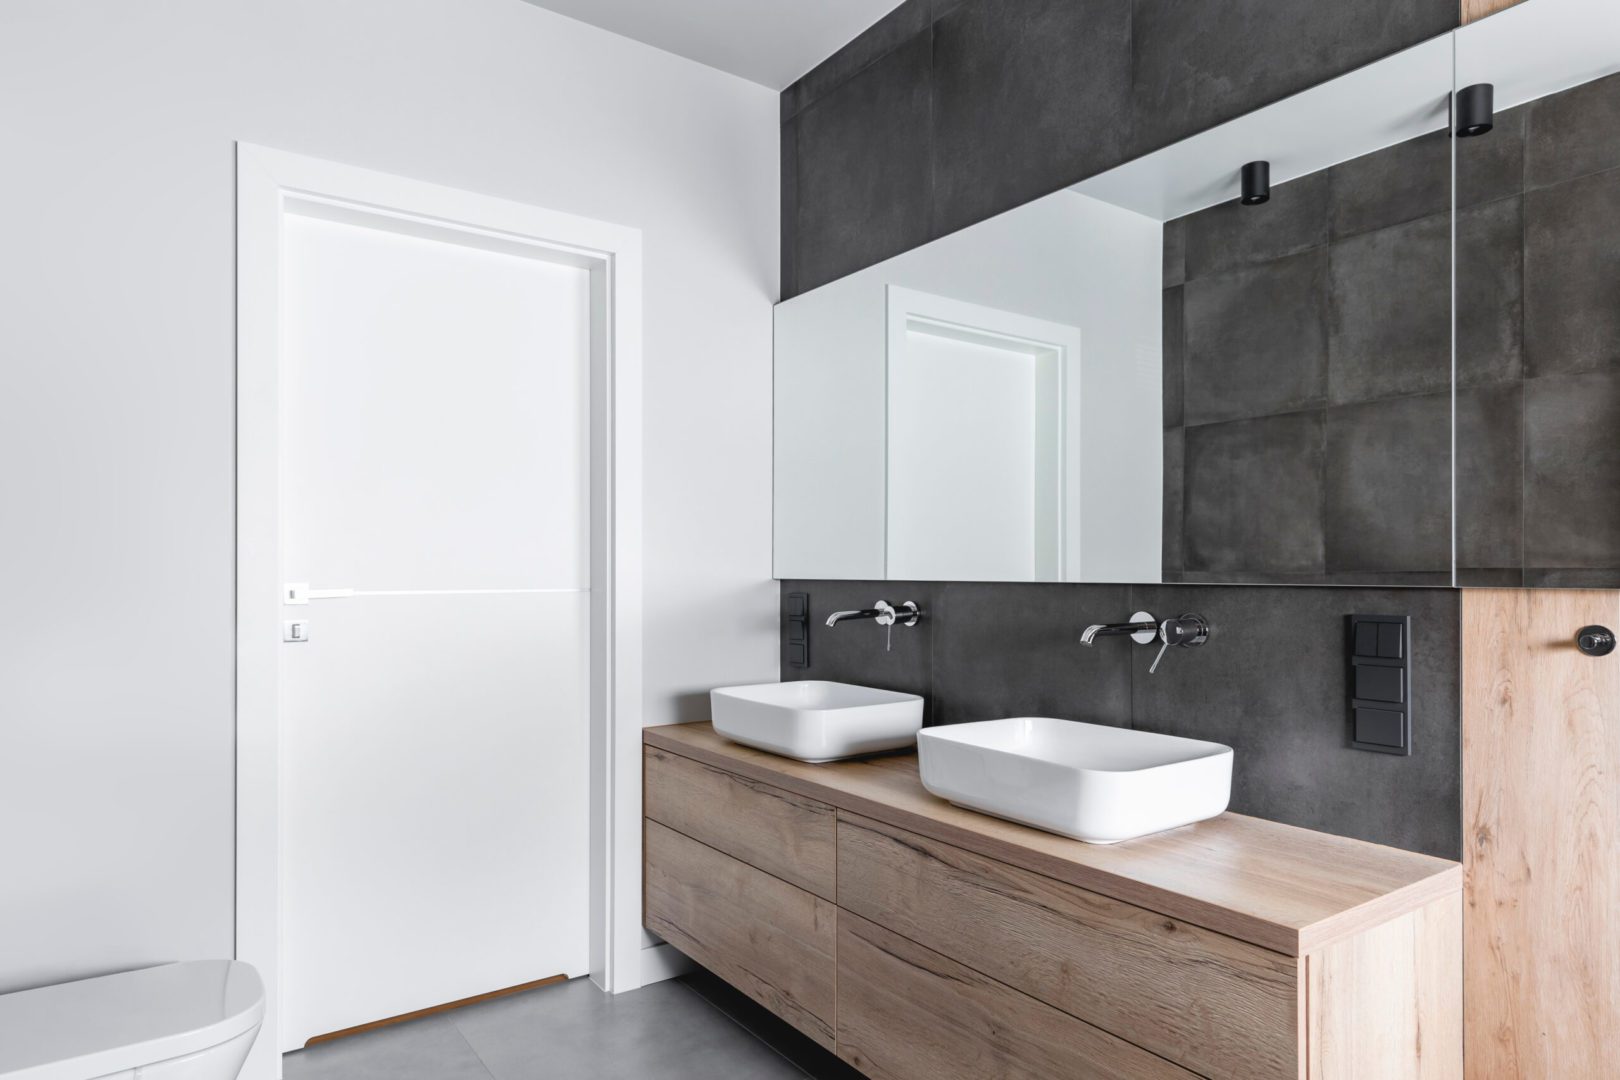 Double,Sinks,In,Elegant,White,,Concrete,And,Wooden,Bathroom,Interior